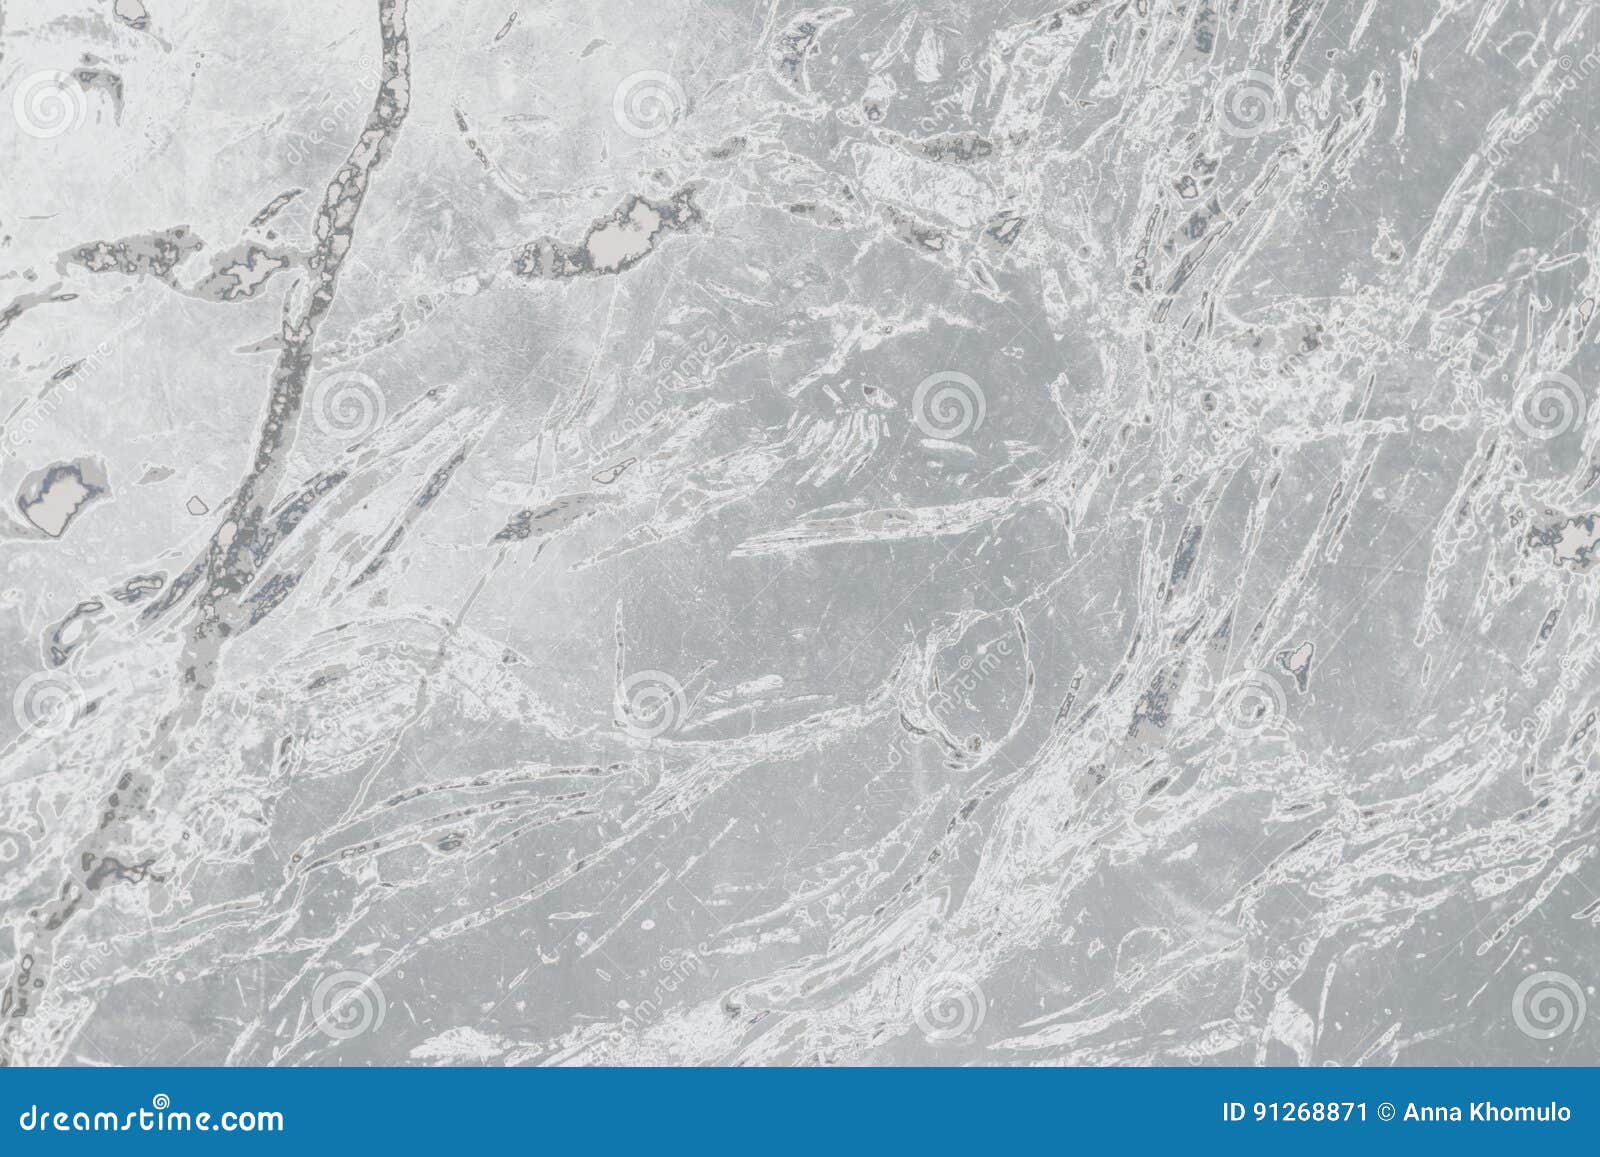 Grey marble background stock image. Image of texture - 91268871